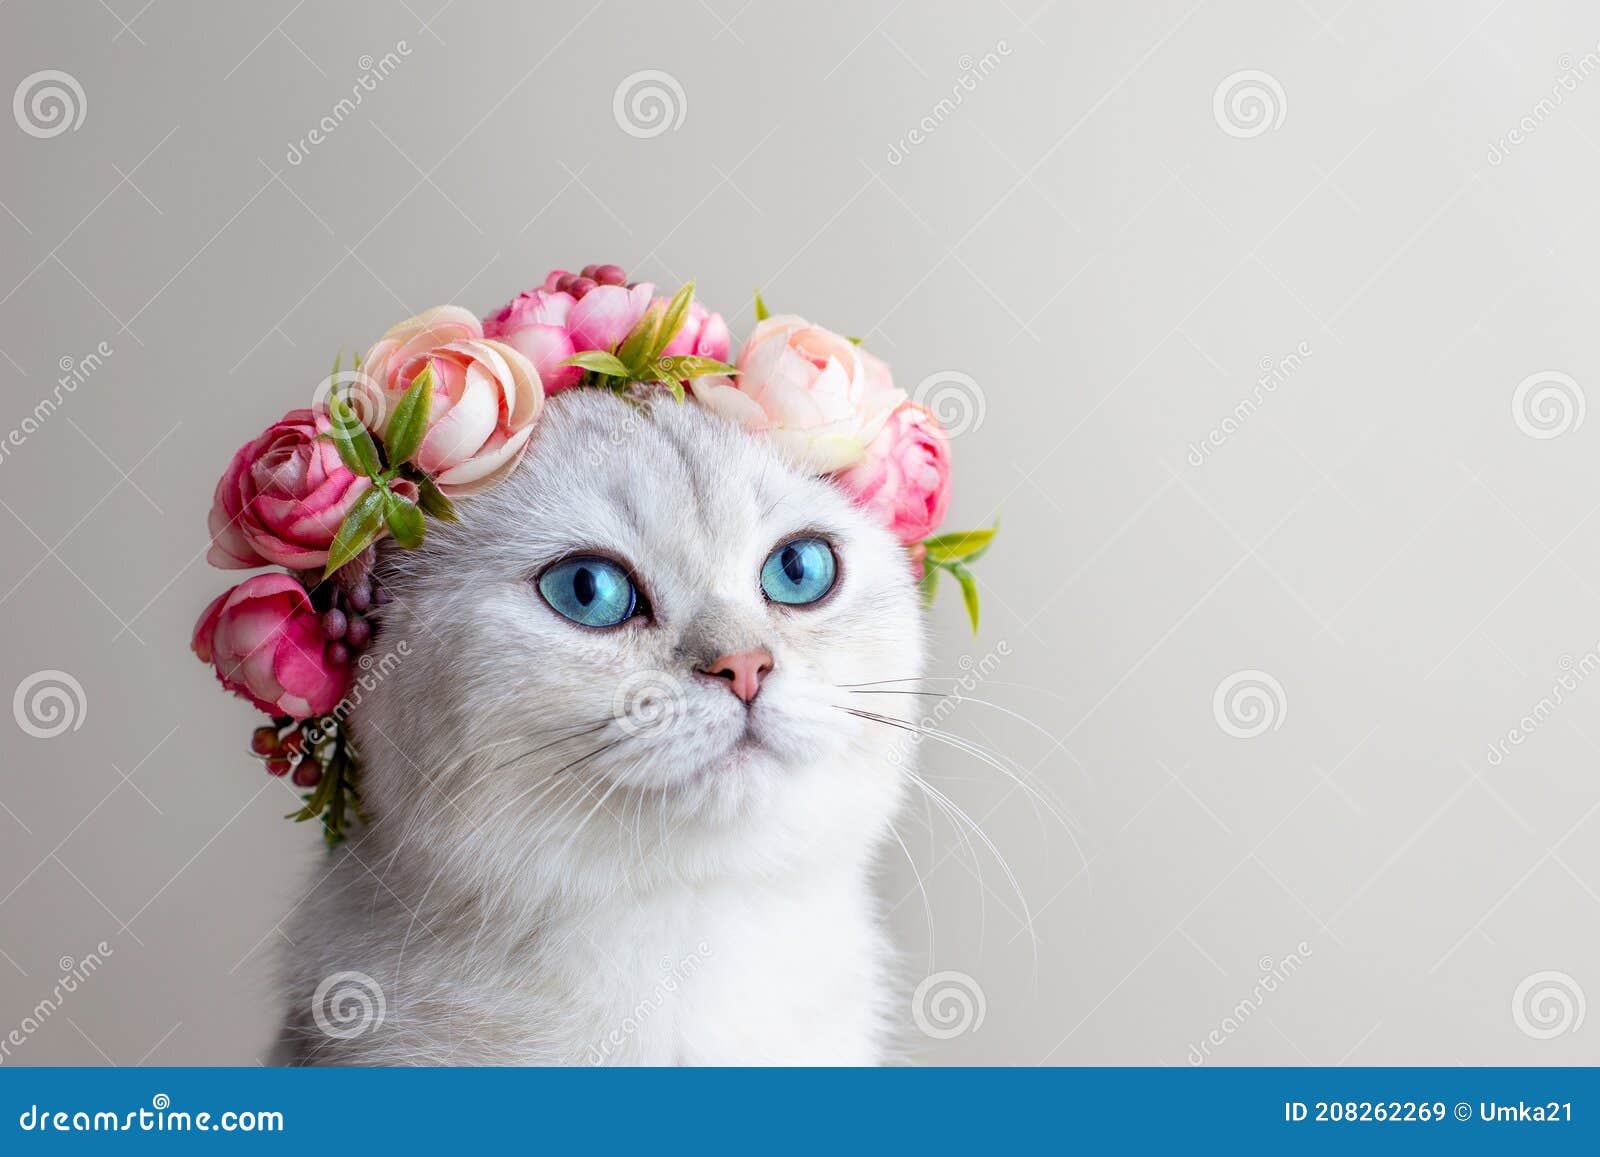 Portrait of a Charming White Cat Wearing a Crown of Pink Flowers ...